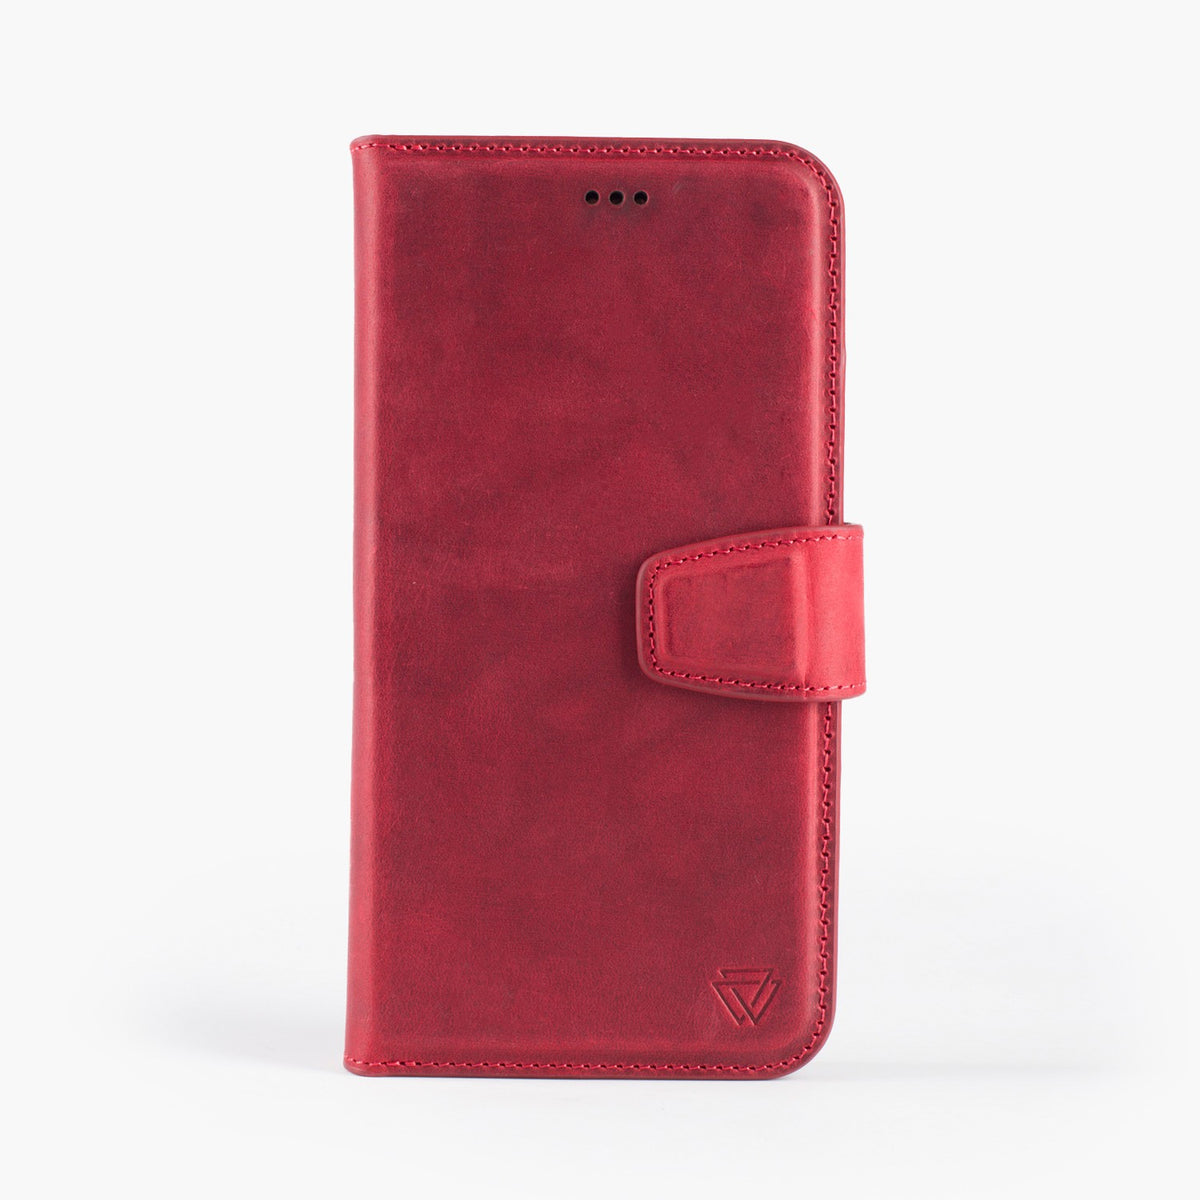 Wachikopa Genuine Leather Magic Book Case 2 in 1 for iPhone X / XS Red